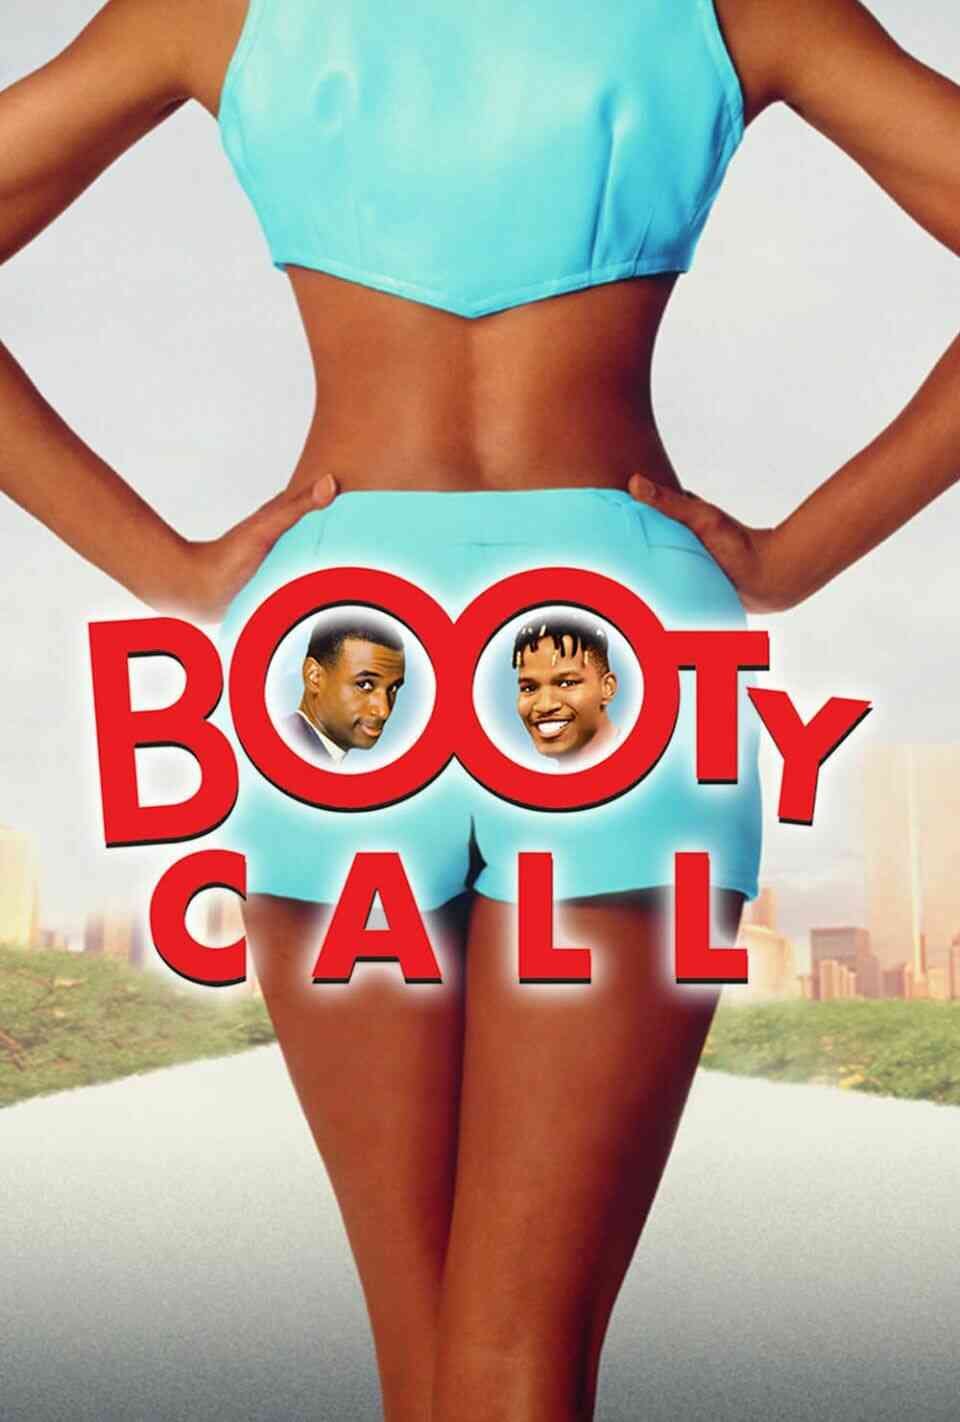 Read Booty Call screenplay (poster)